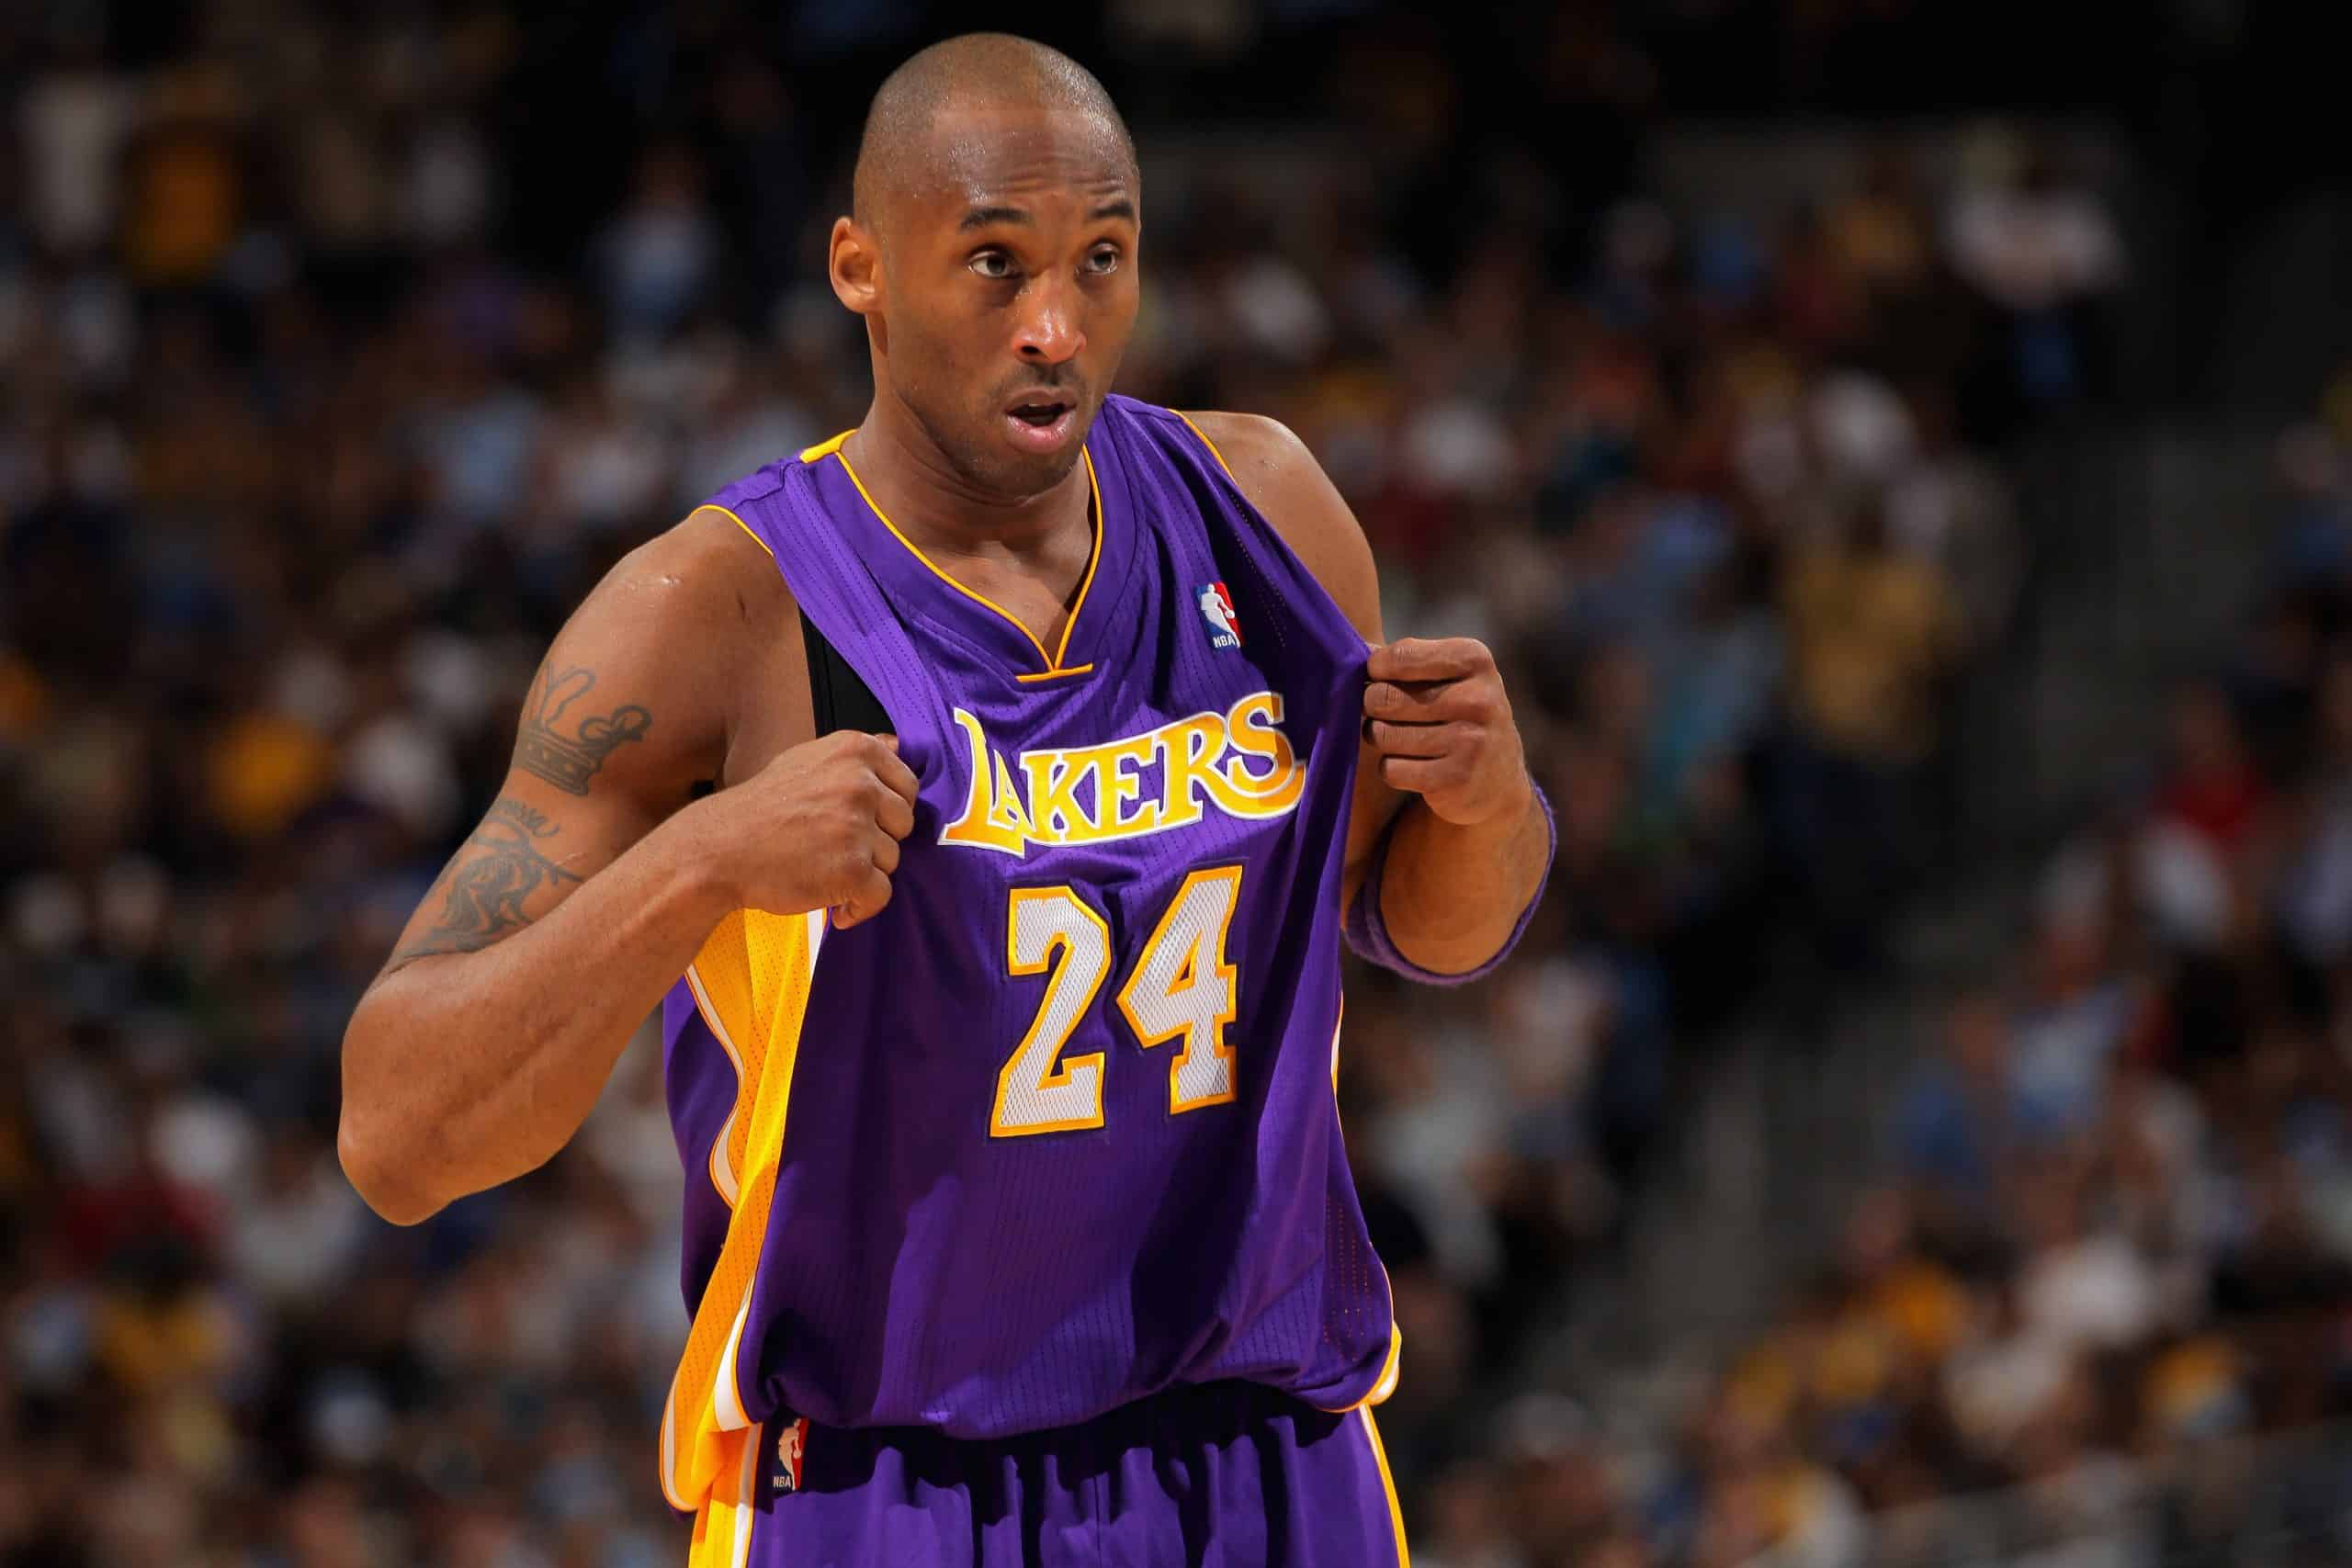 Kobe Bryant of the Los Angeles Lakers adjusts his jersey.